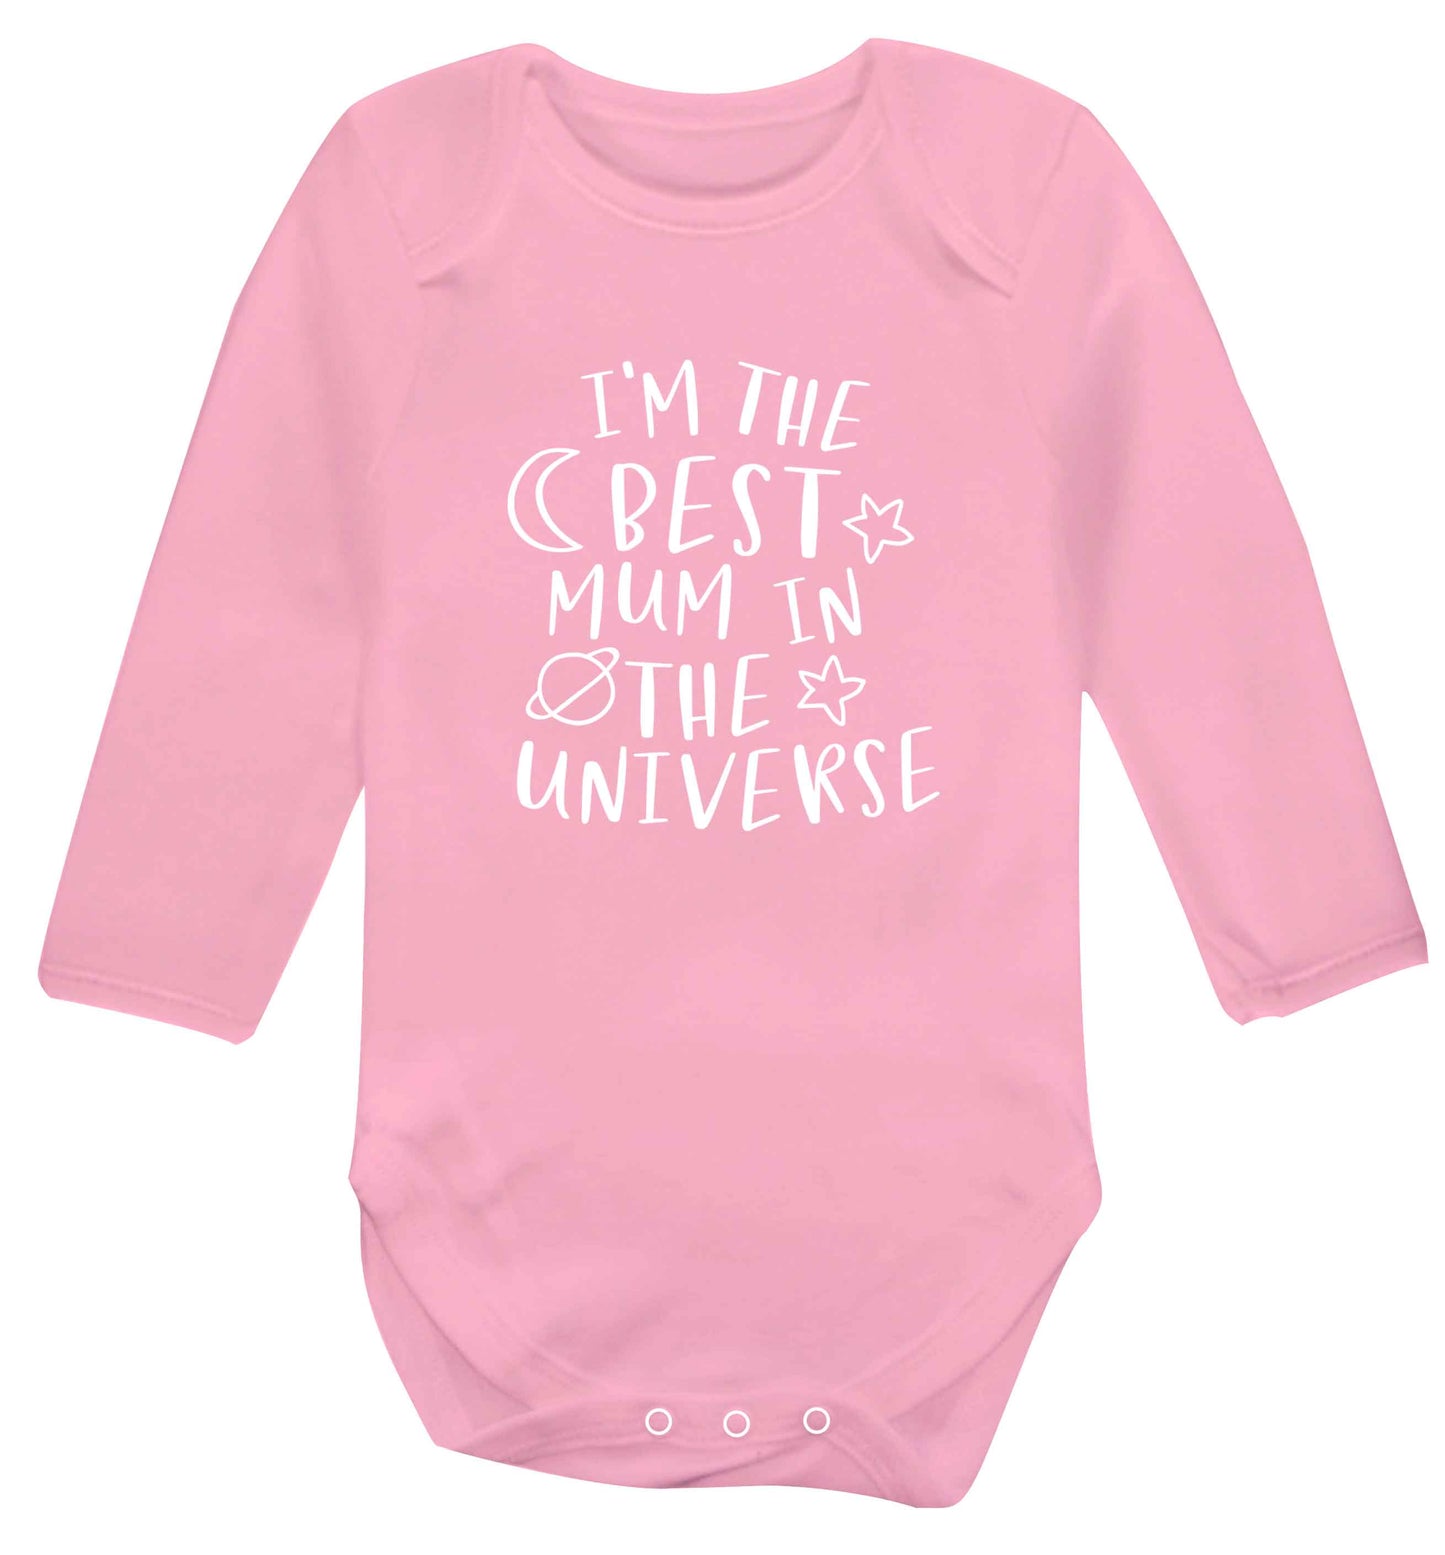 I'm the best mum in the universe baby vest long sleeved pale pink 6-12 months